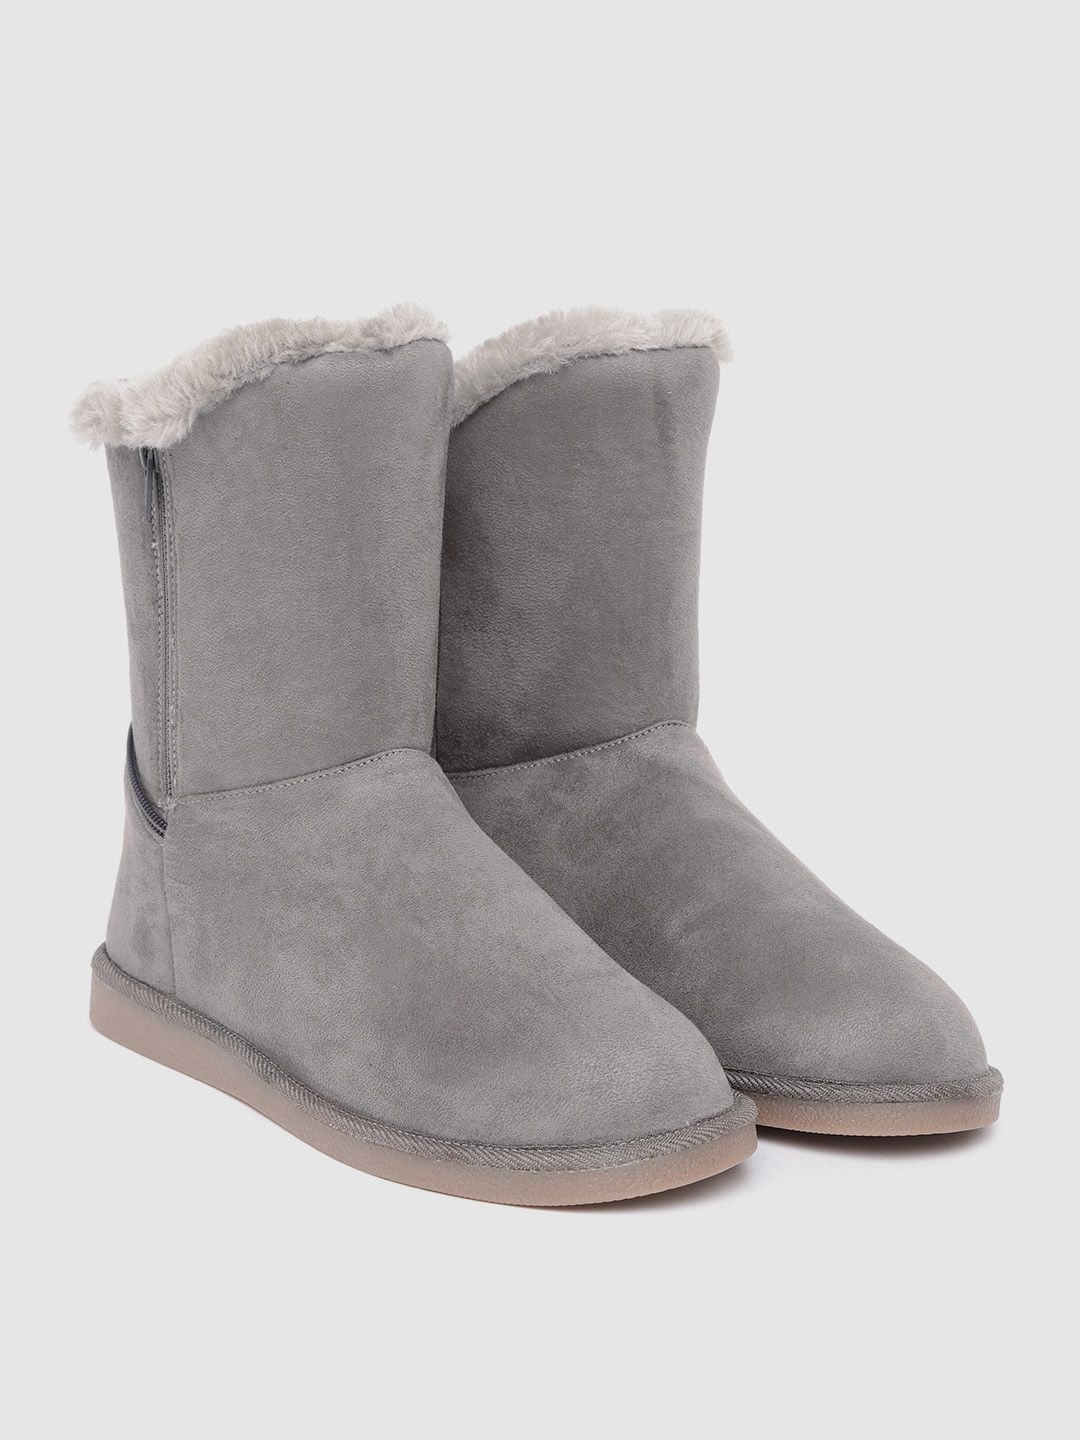 Carlton London Women Grey Solid Synthetic Suede Finish Faux Fur Lined Mid-Top Flat Boots Price in India